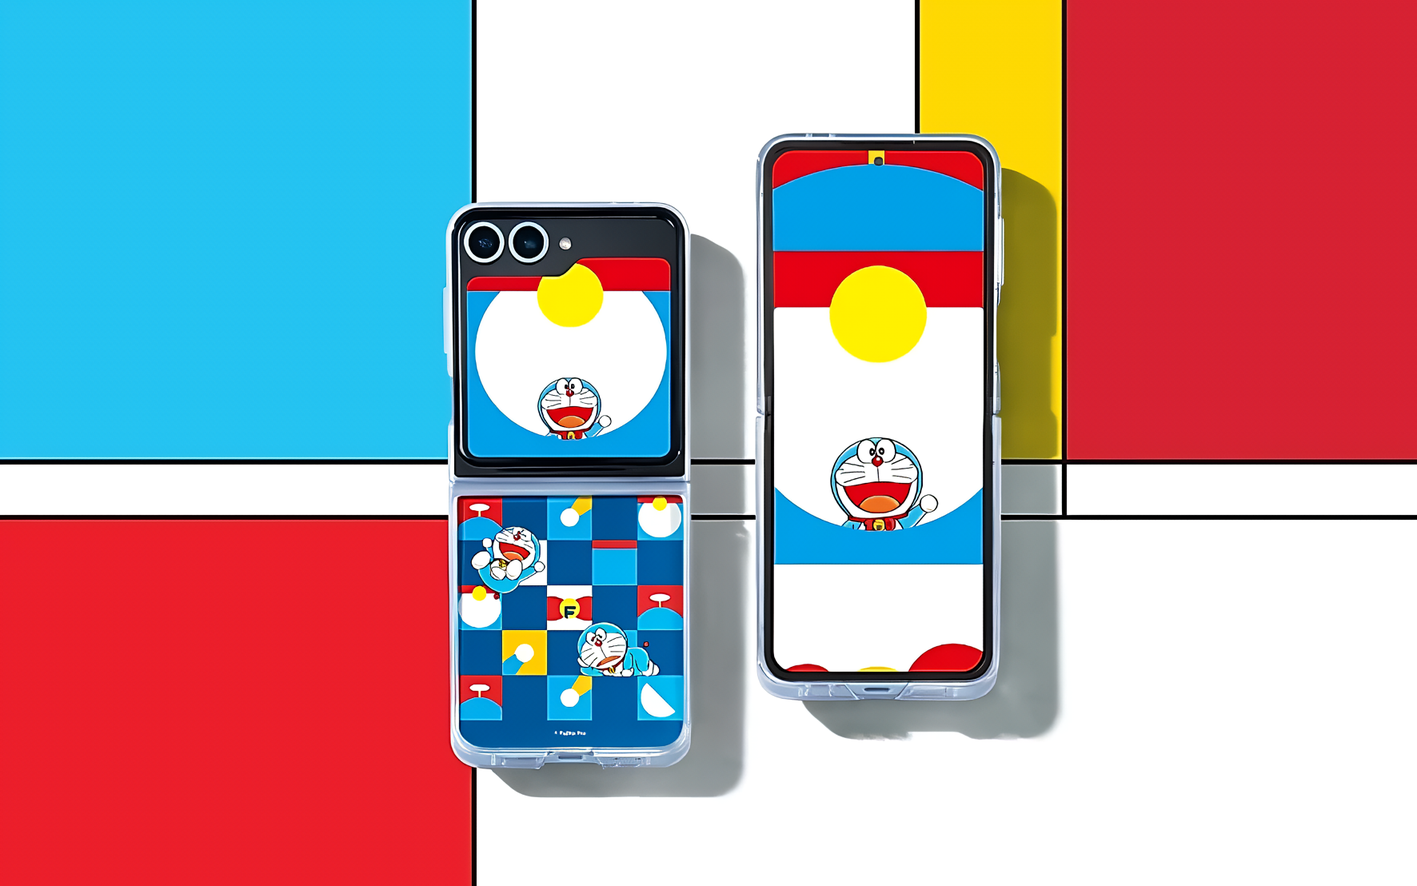 Samsung has launched a limited edition Galaxy Flip 6 in Hong Kong in the style of anime Doraemon